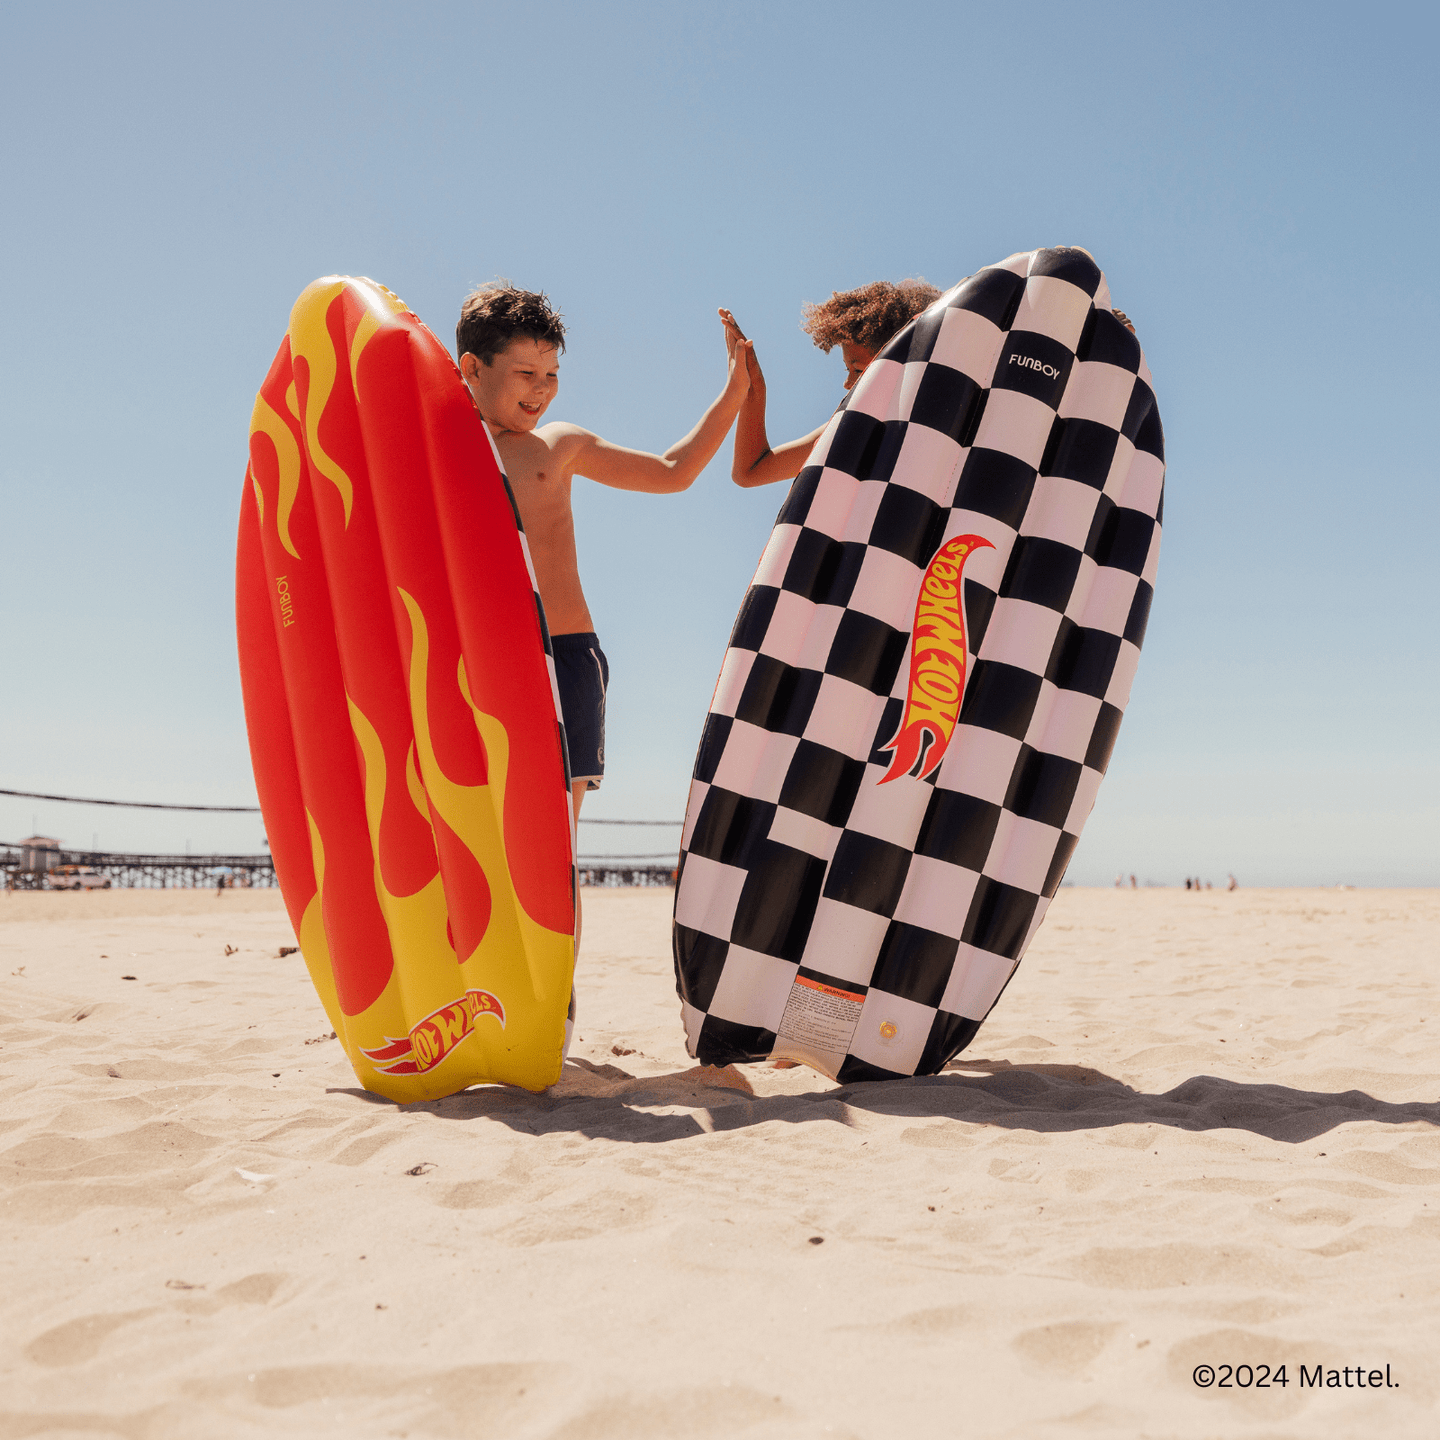 Hot Wheels Checkered Flame Surfboard (Reversible) Pool Float